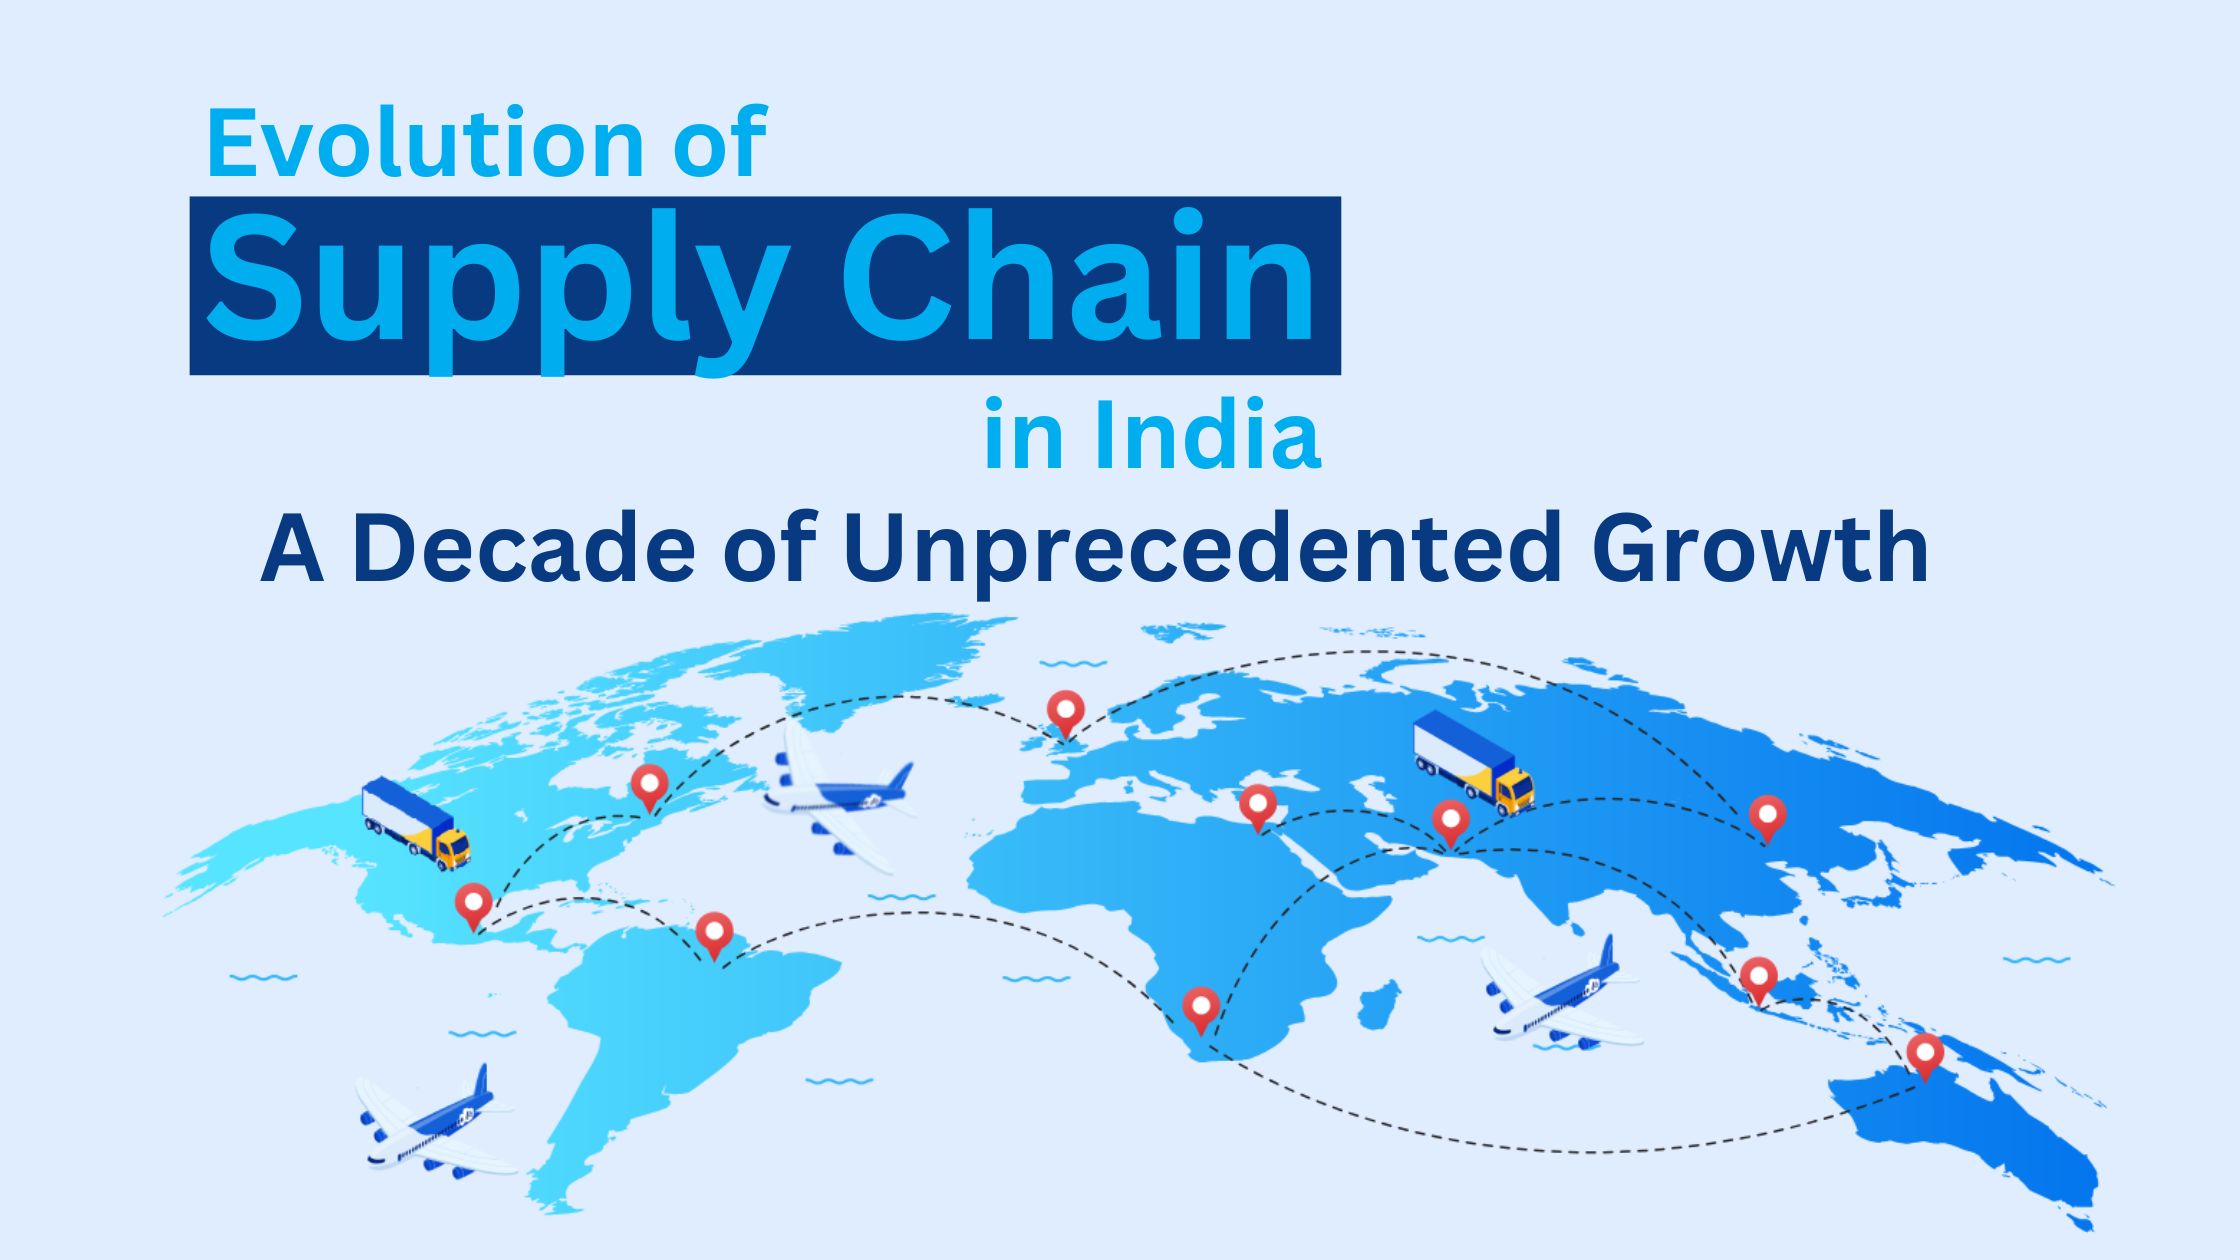 Evolution of Supply Chain in India